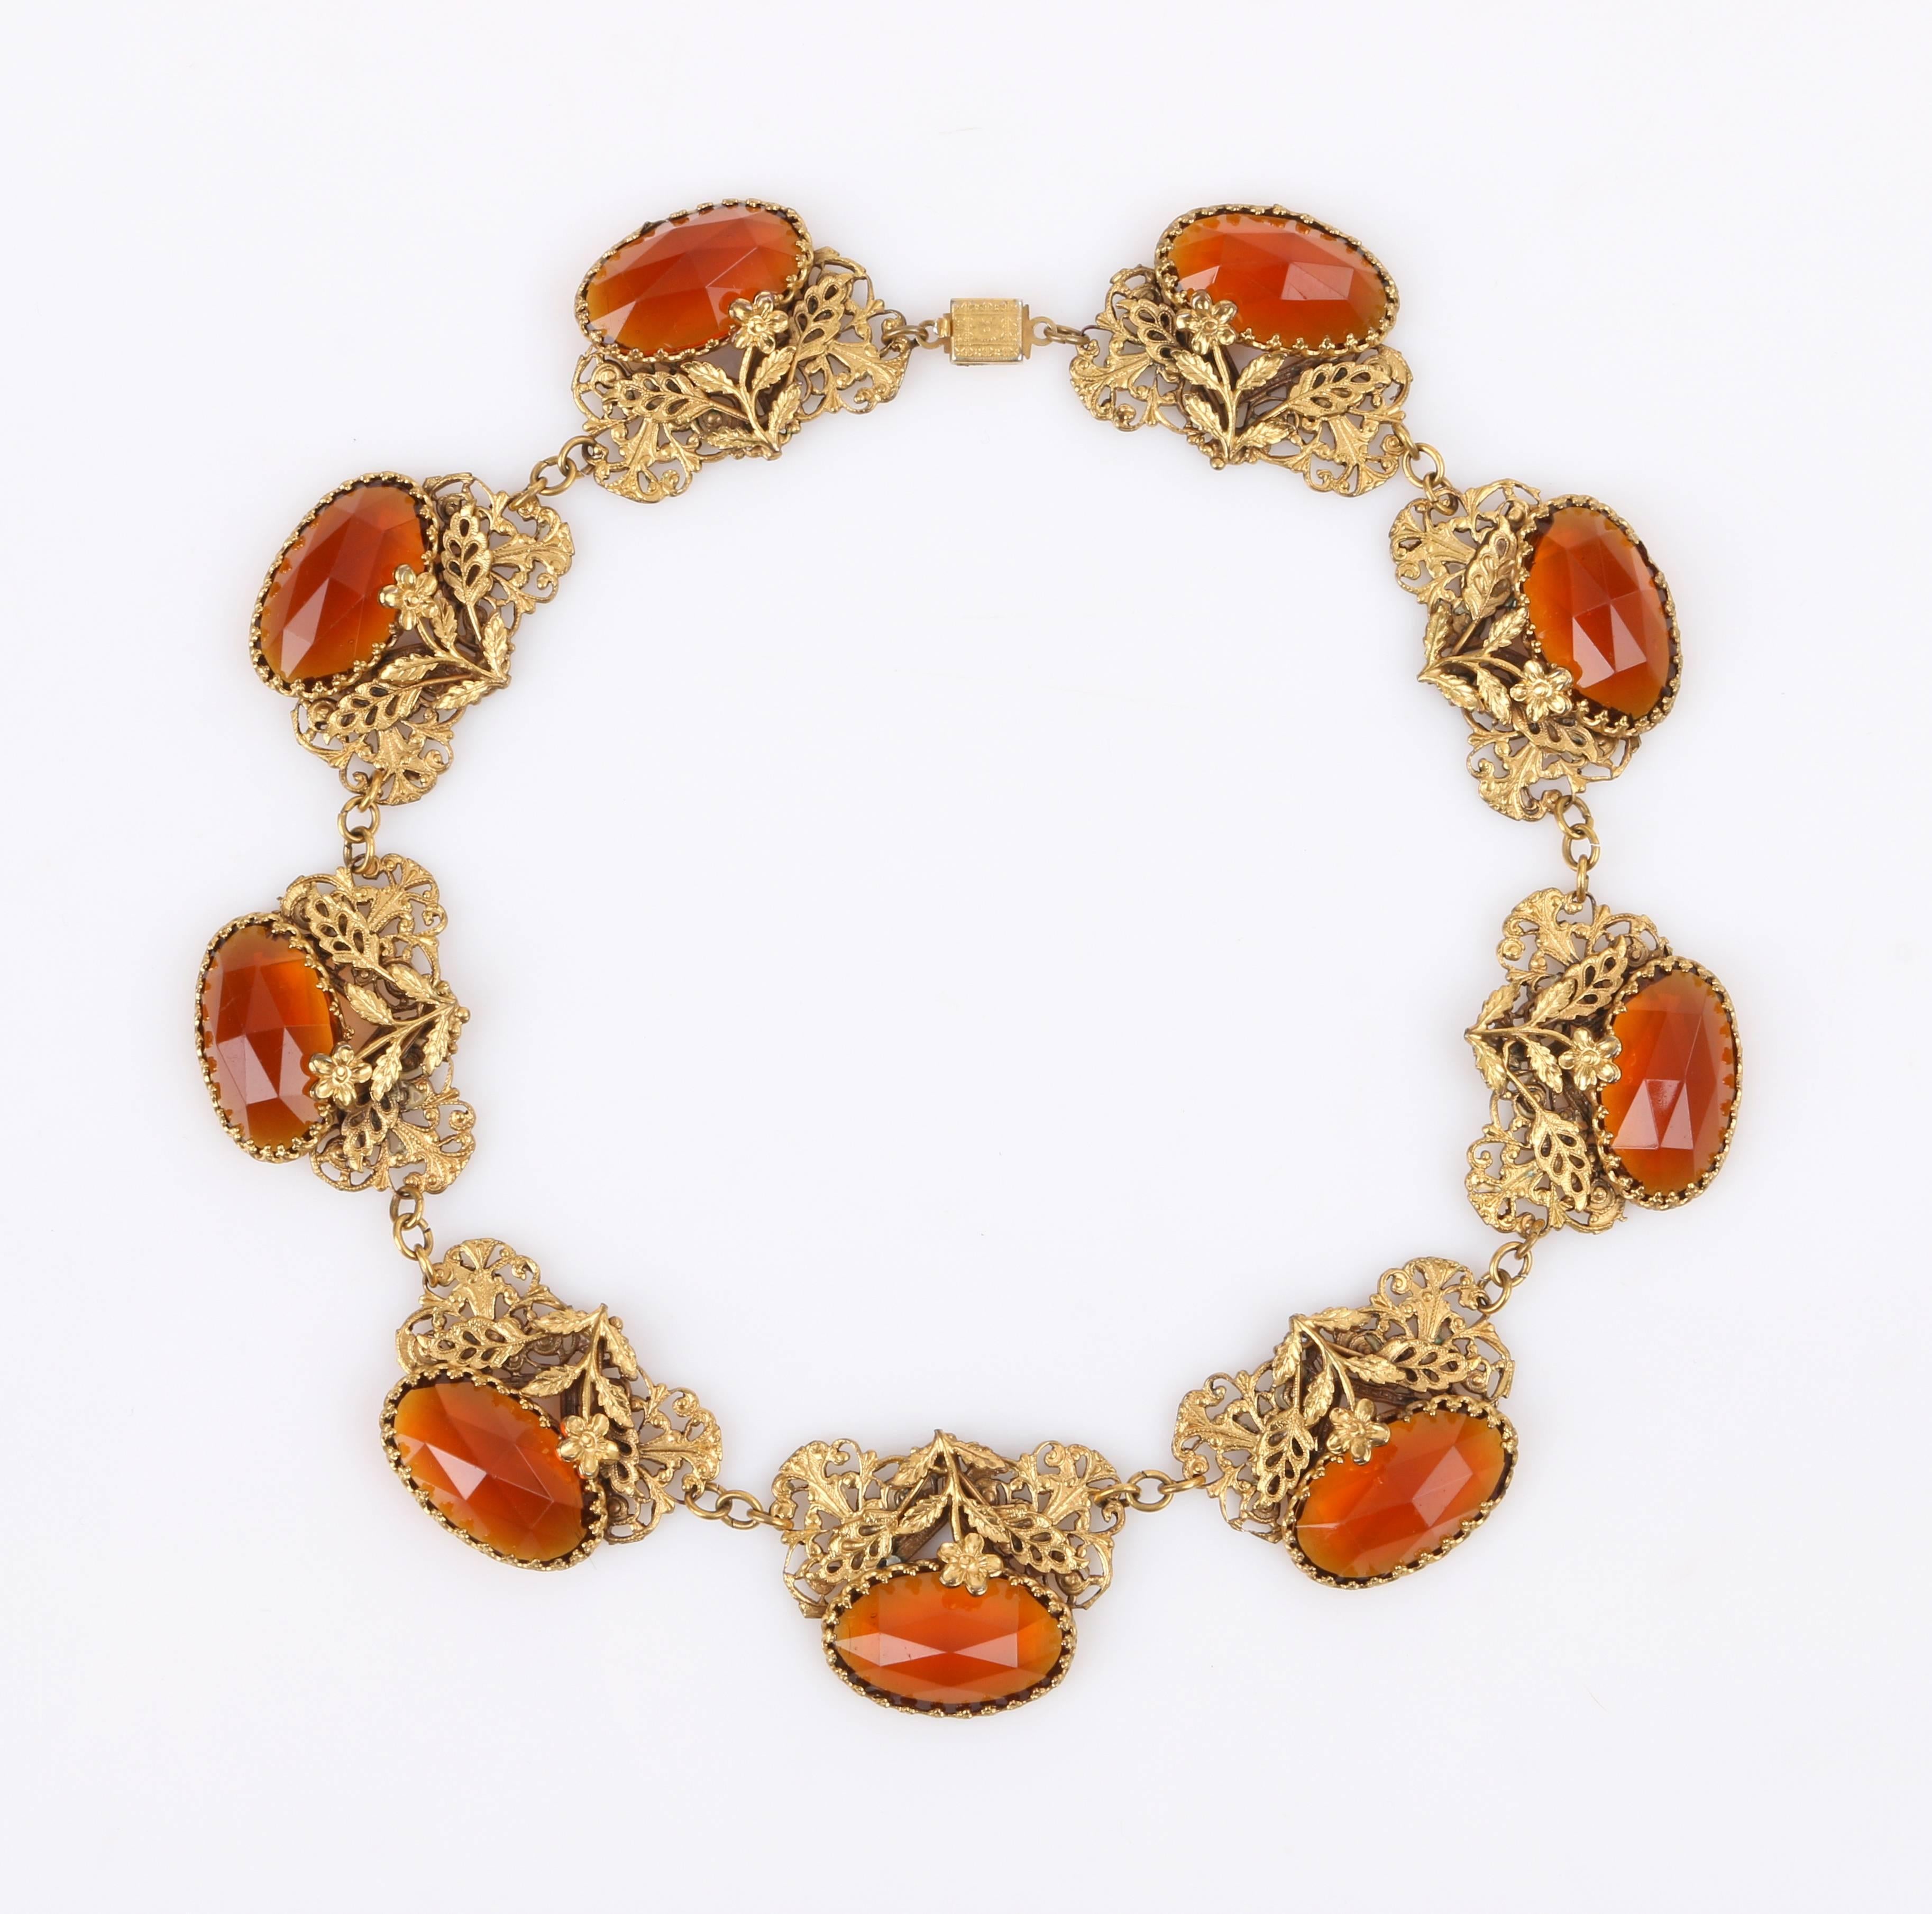 Vintage Art Nouveau c.1930's floral filigree brass and amber Czech glass choker necklace. Nine faceted oval amber czech glass gems prong set into a brass-toned metal open work filigree setting with single flower overlay. Each setting is linked